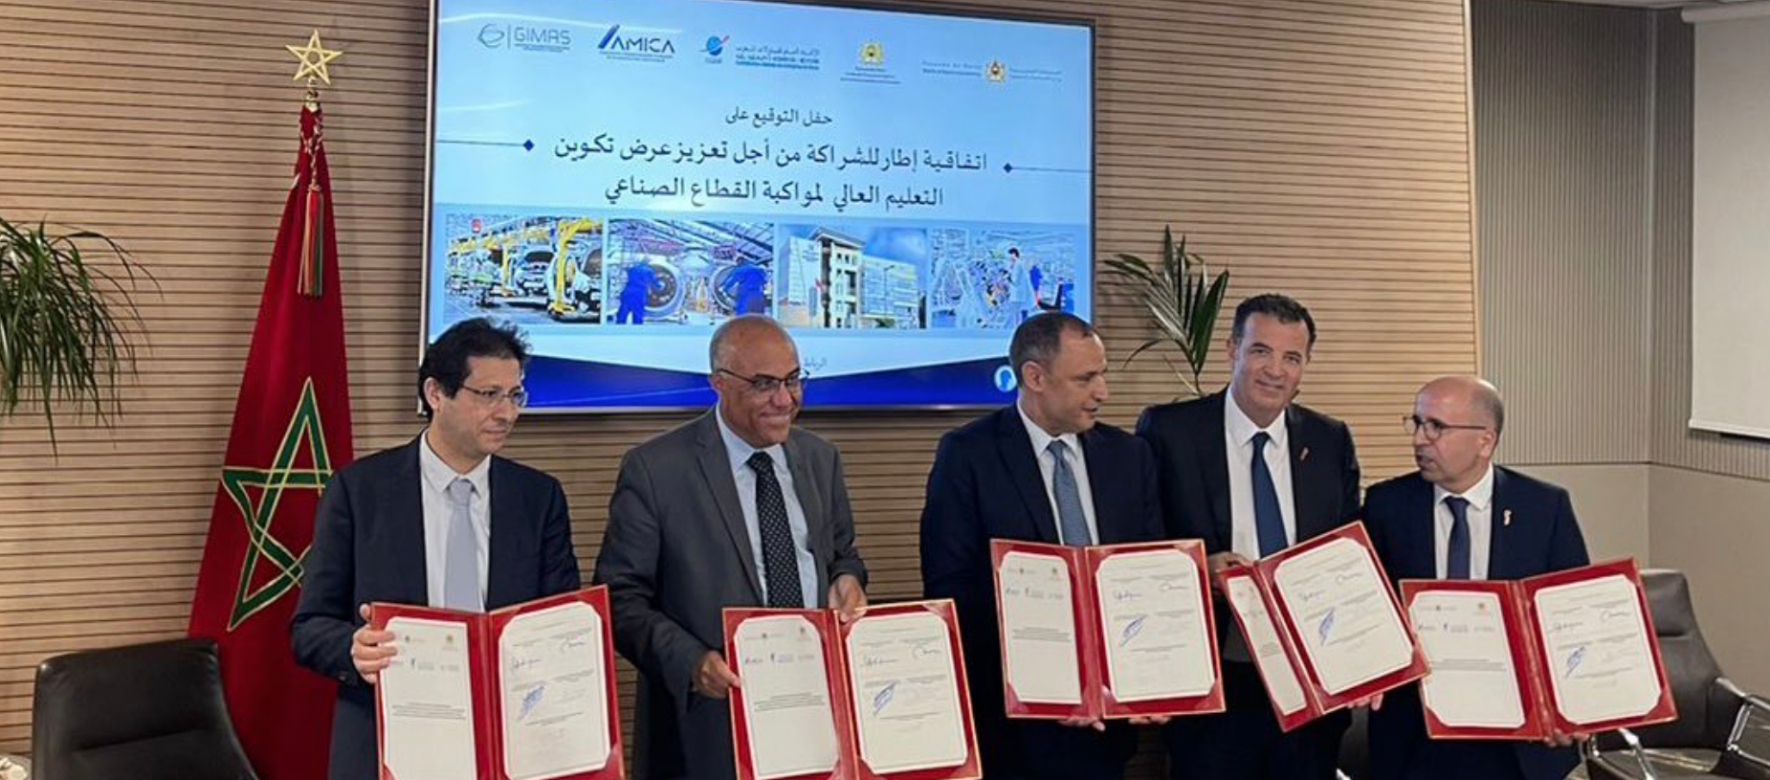 Morocco wants to train and guarantee the employability of 100,000 engineers, middle managers and senior technicians in the automotive and aeronautics sectors by 2025